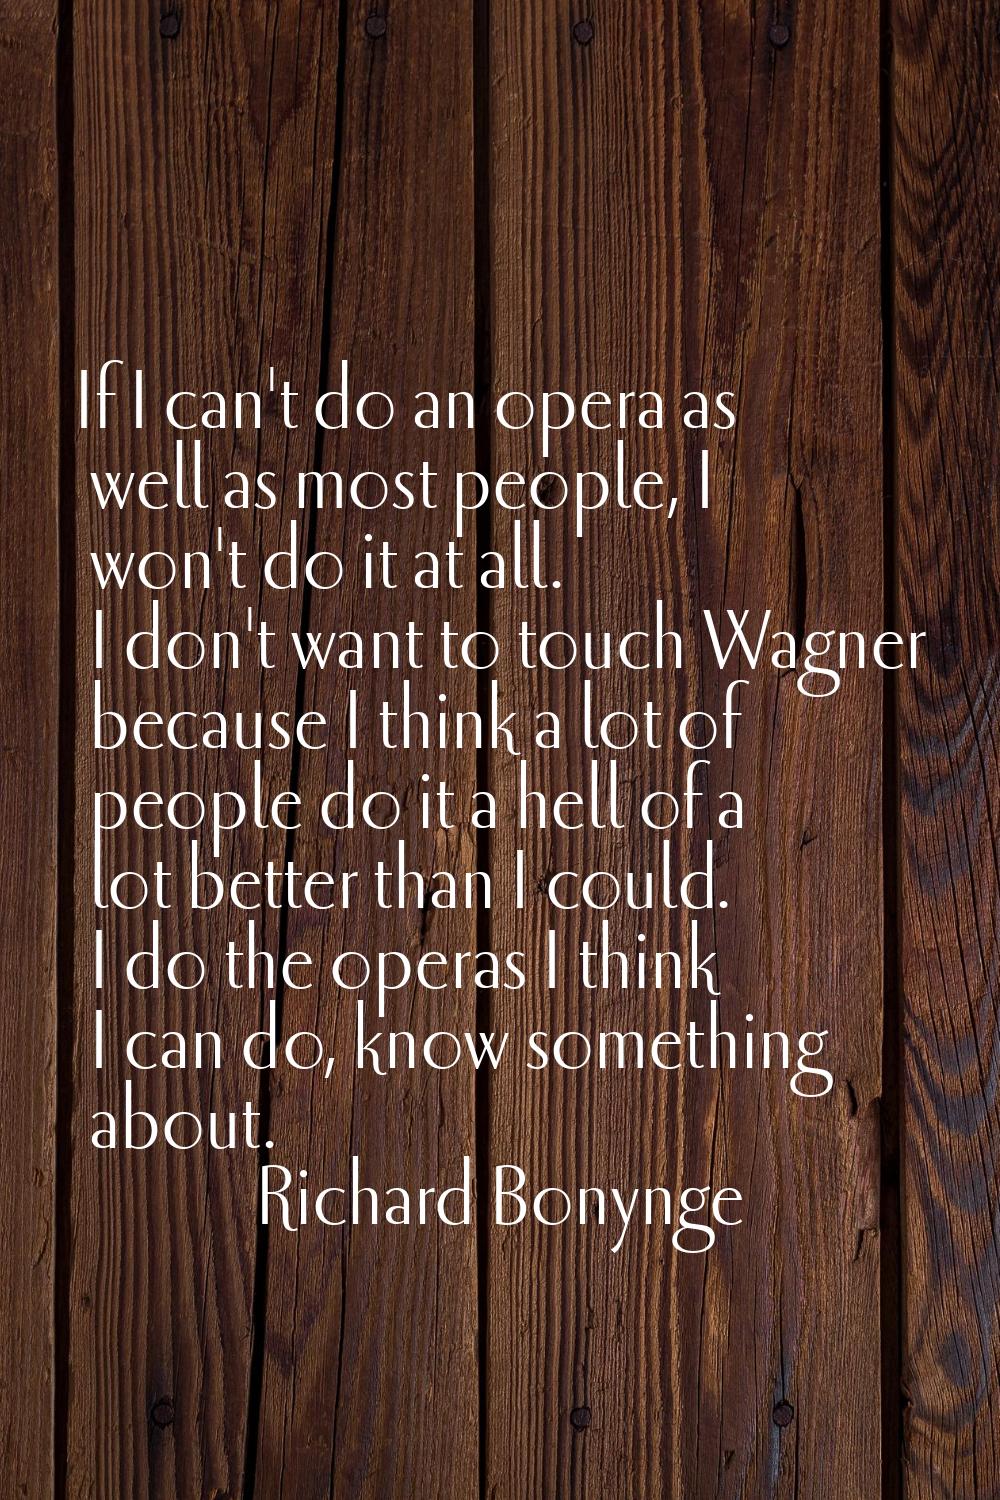 If I can't do an opera as well as most people, I won't do it at all. I don't want to touch Wagner b